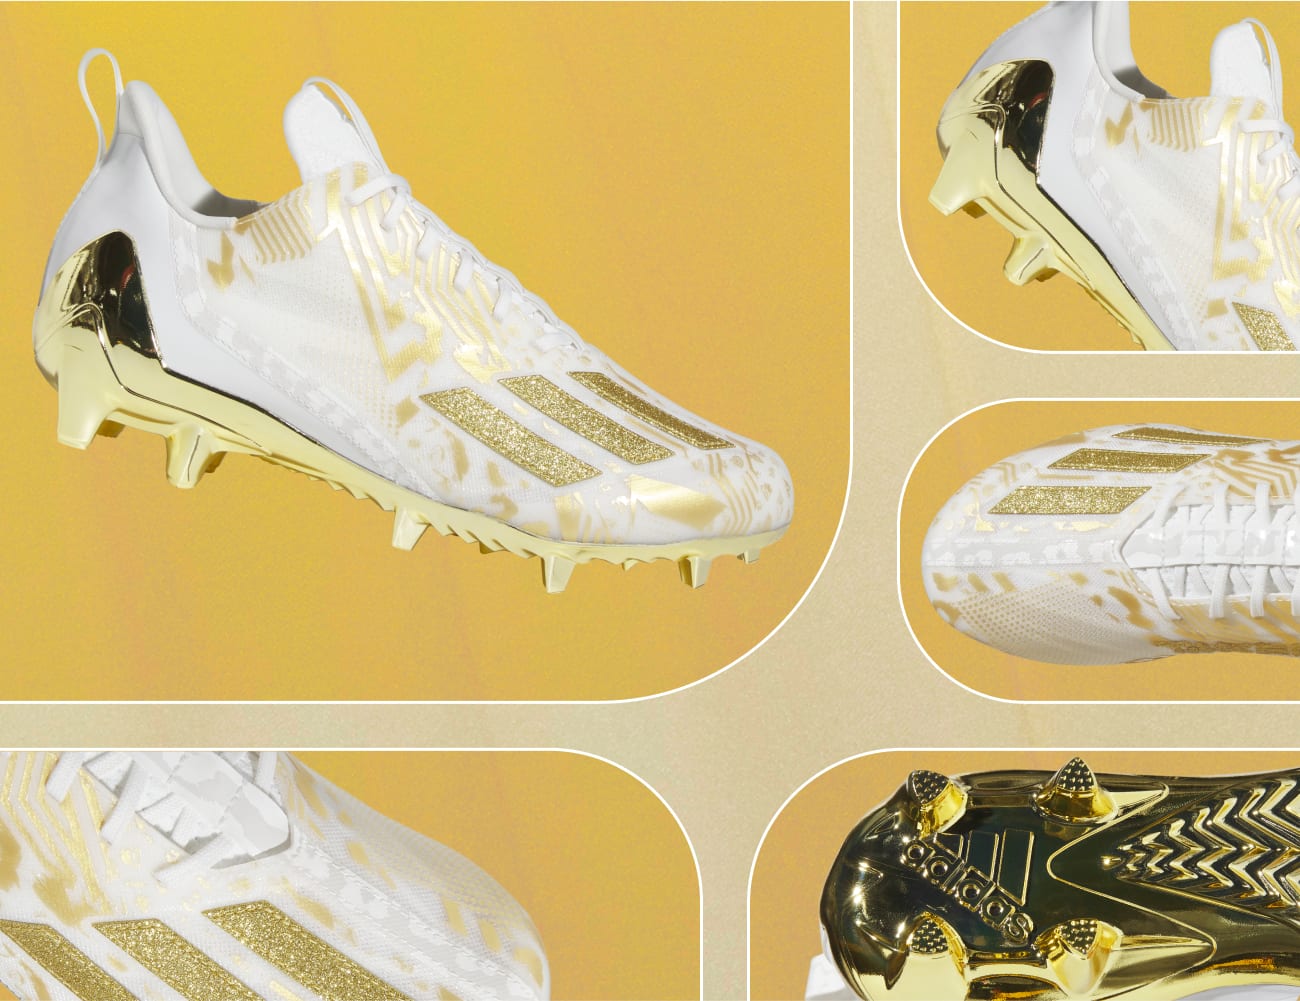 Adidas is Releasing U.S. Military-Inspired Football Cleats [PHOTOS